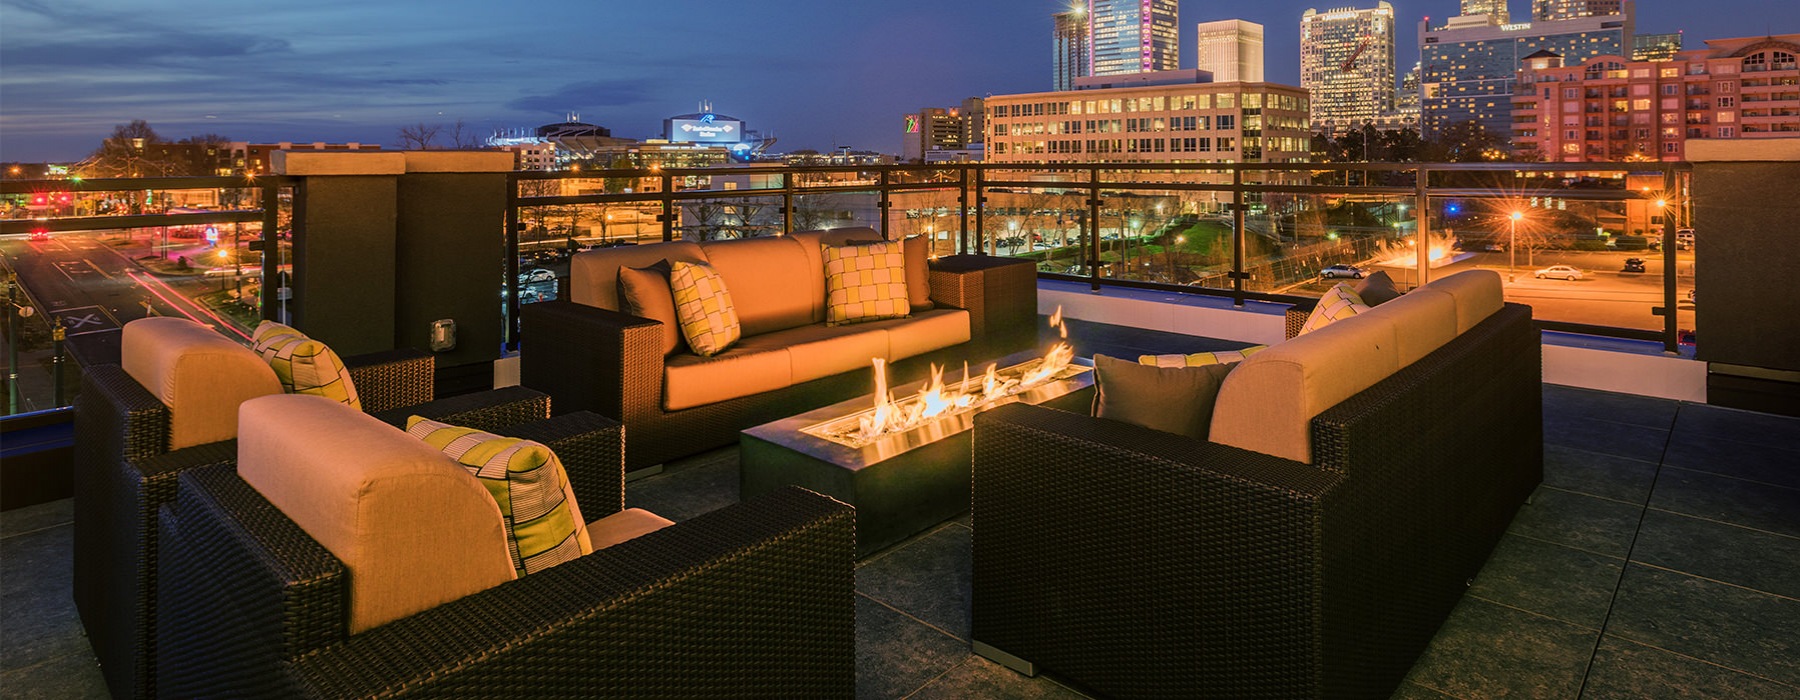 Rooftop Terrace with firepit at night.